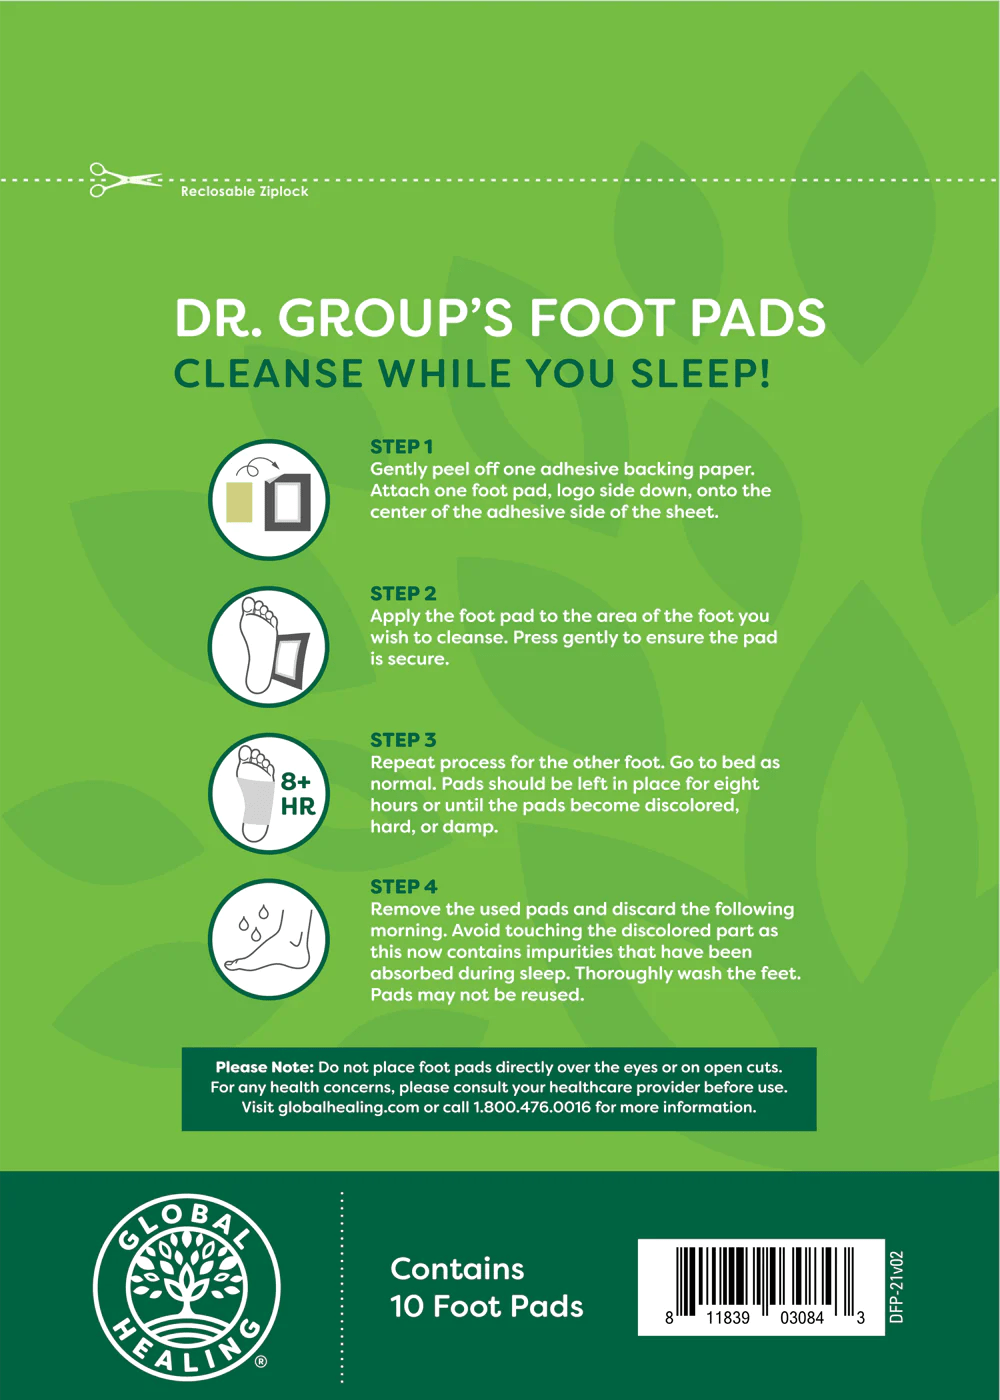 Dr Groups Foot Pads Intructions For Use